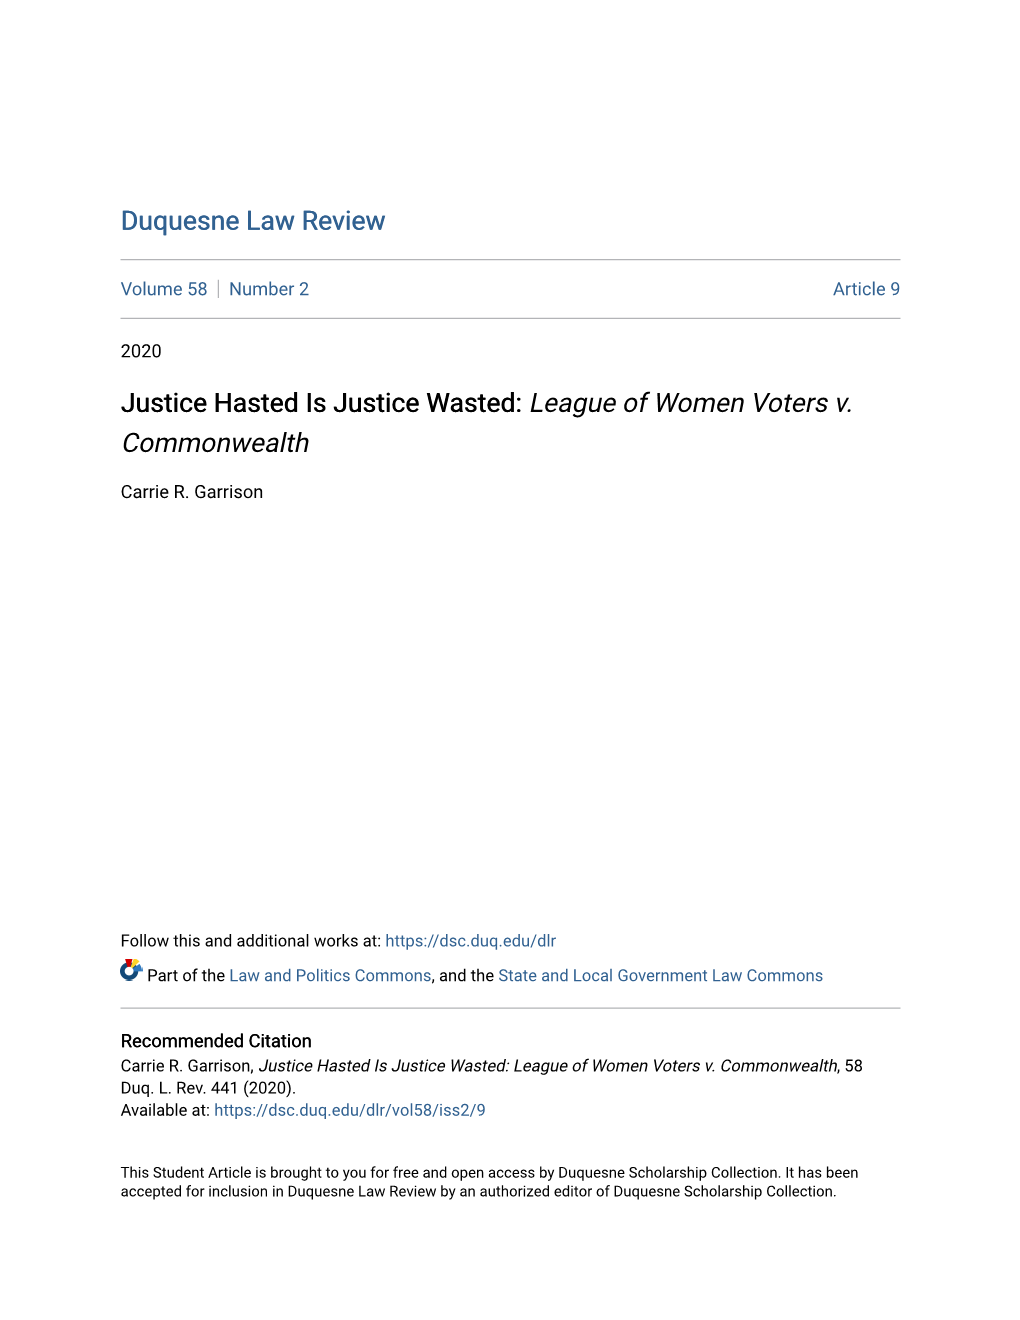 Justice Hasted Is Justice Wasted: League of Women Voters V. Commonwealth